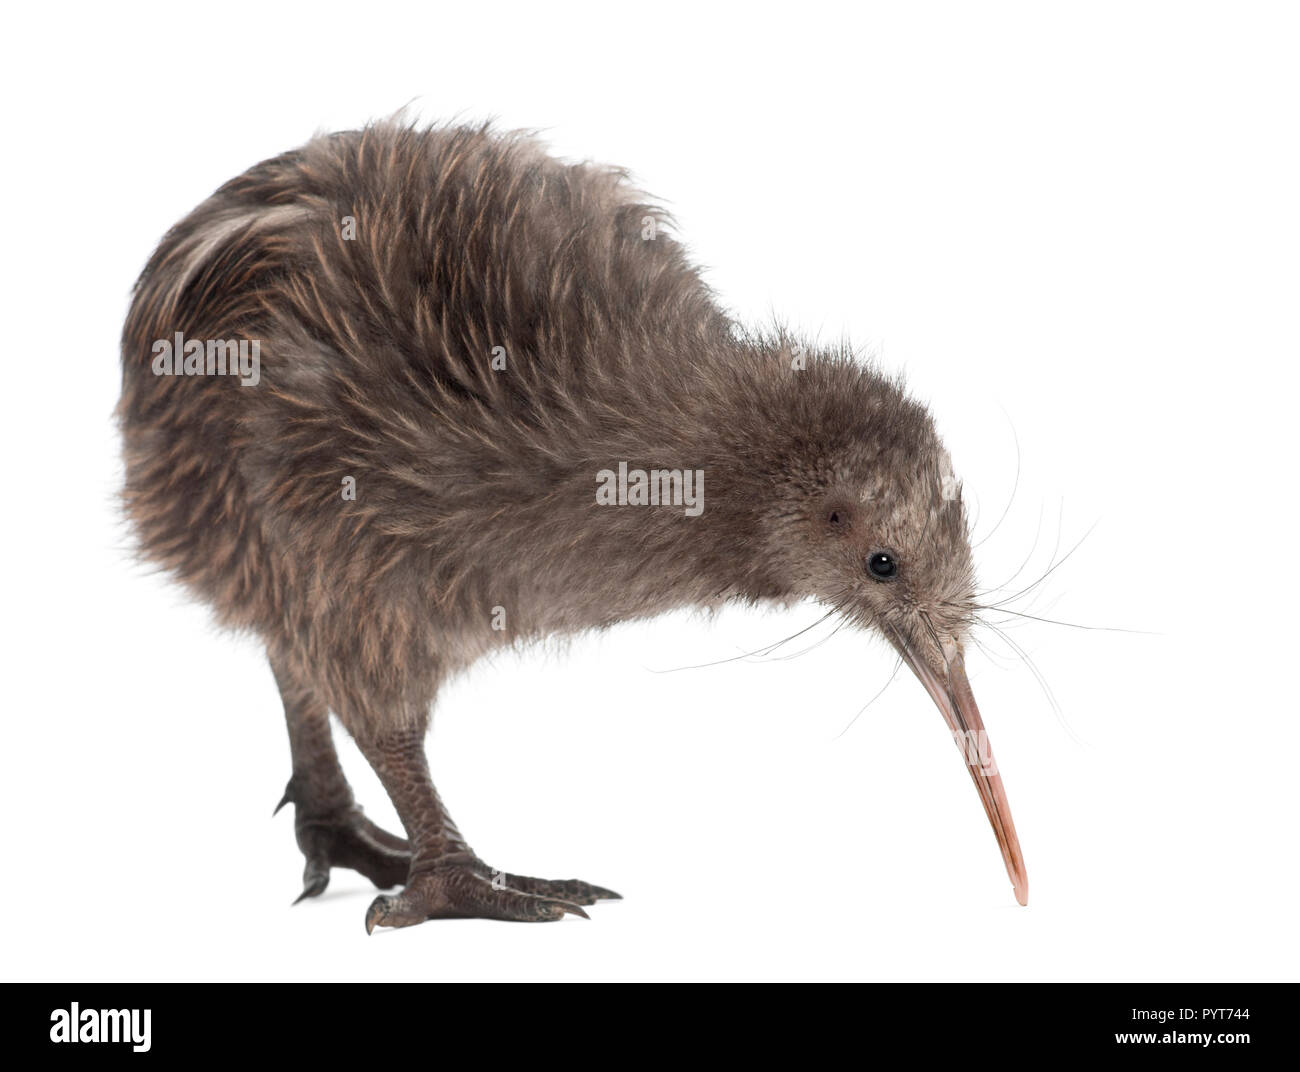 North Island Brown Kiwi, Apteryx mantelli, 5 months old, standing against white background Stock Photo